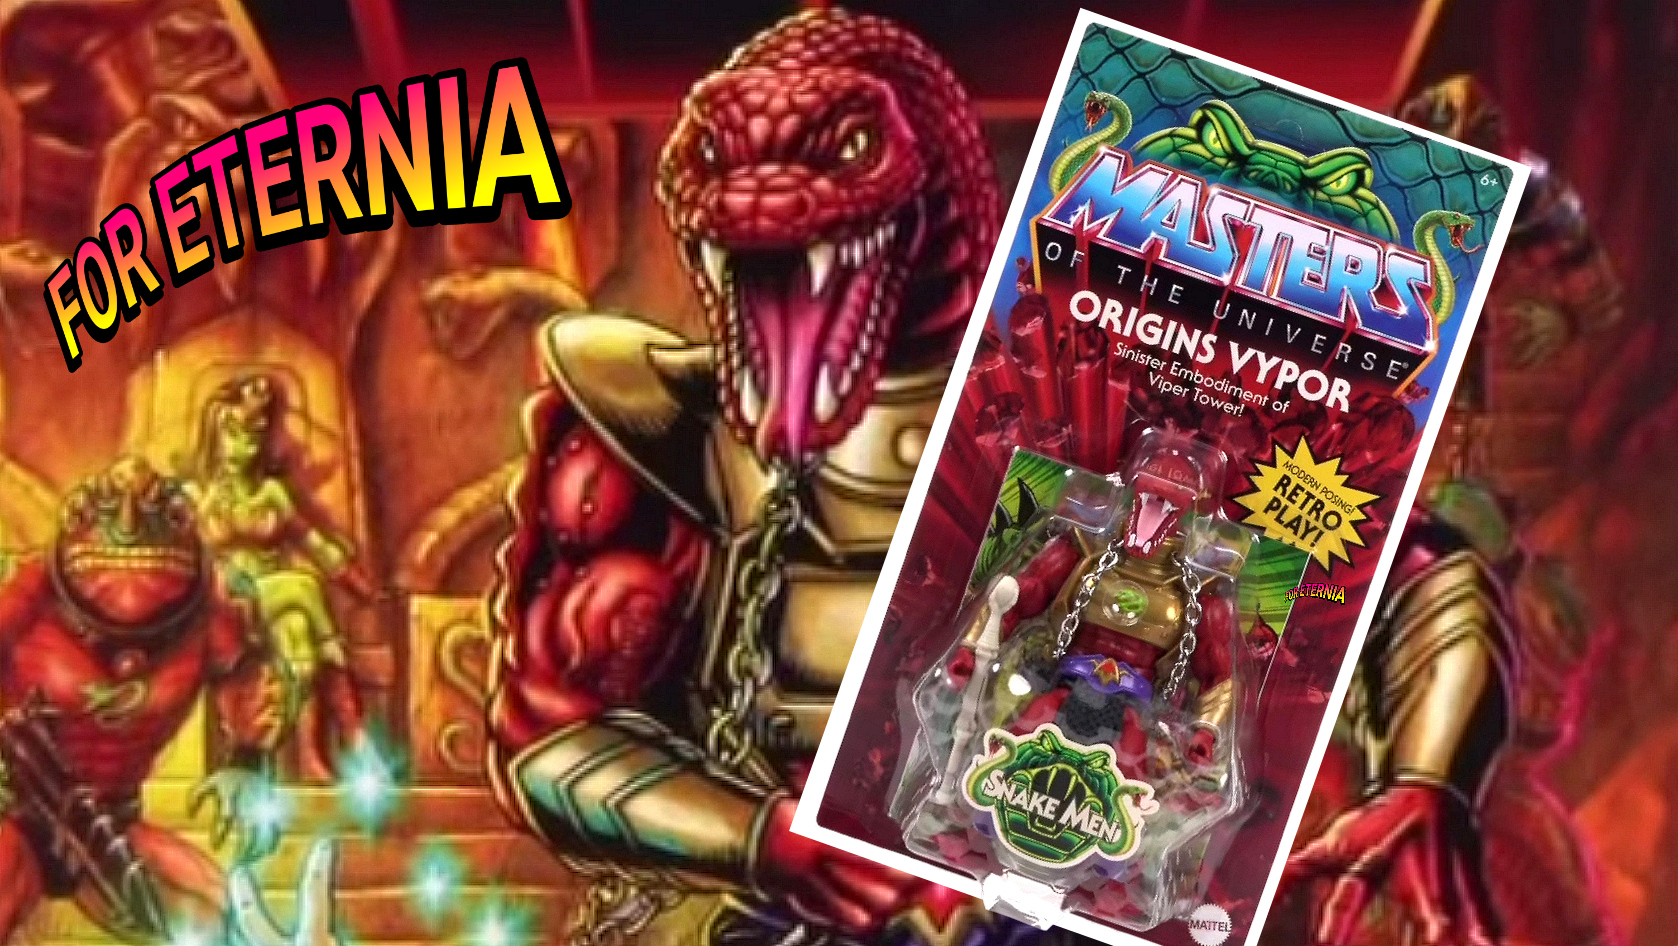 Full Packaging revealed for Masters of the Universe: Origins VYPOR Figure *UPDATED*